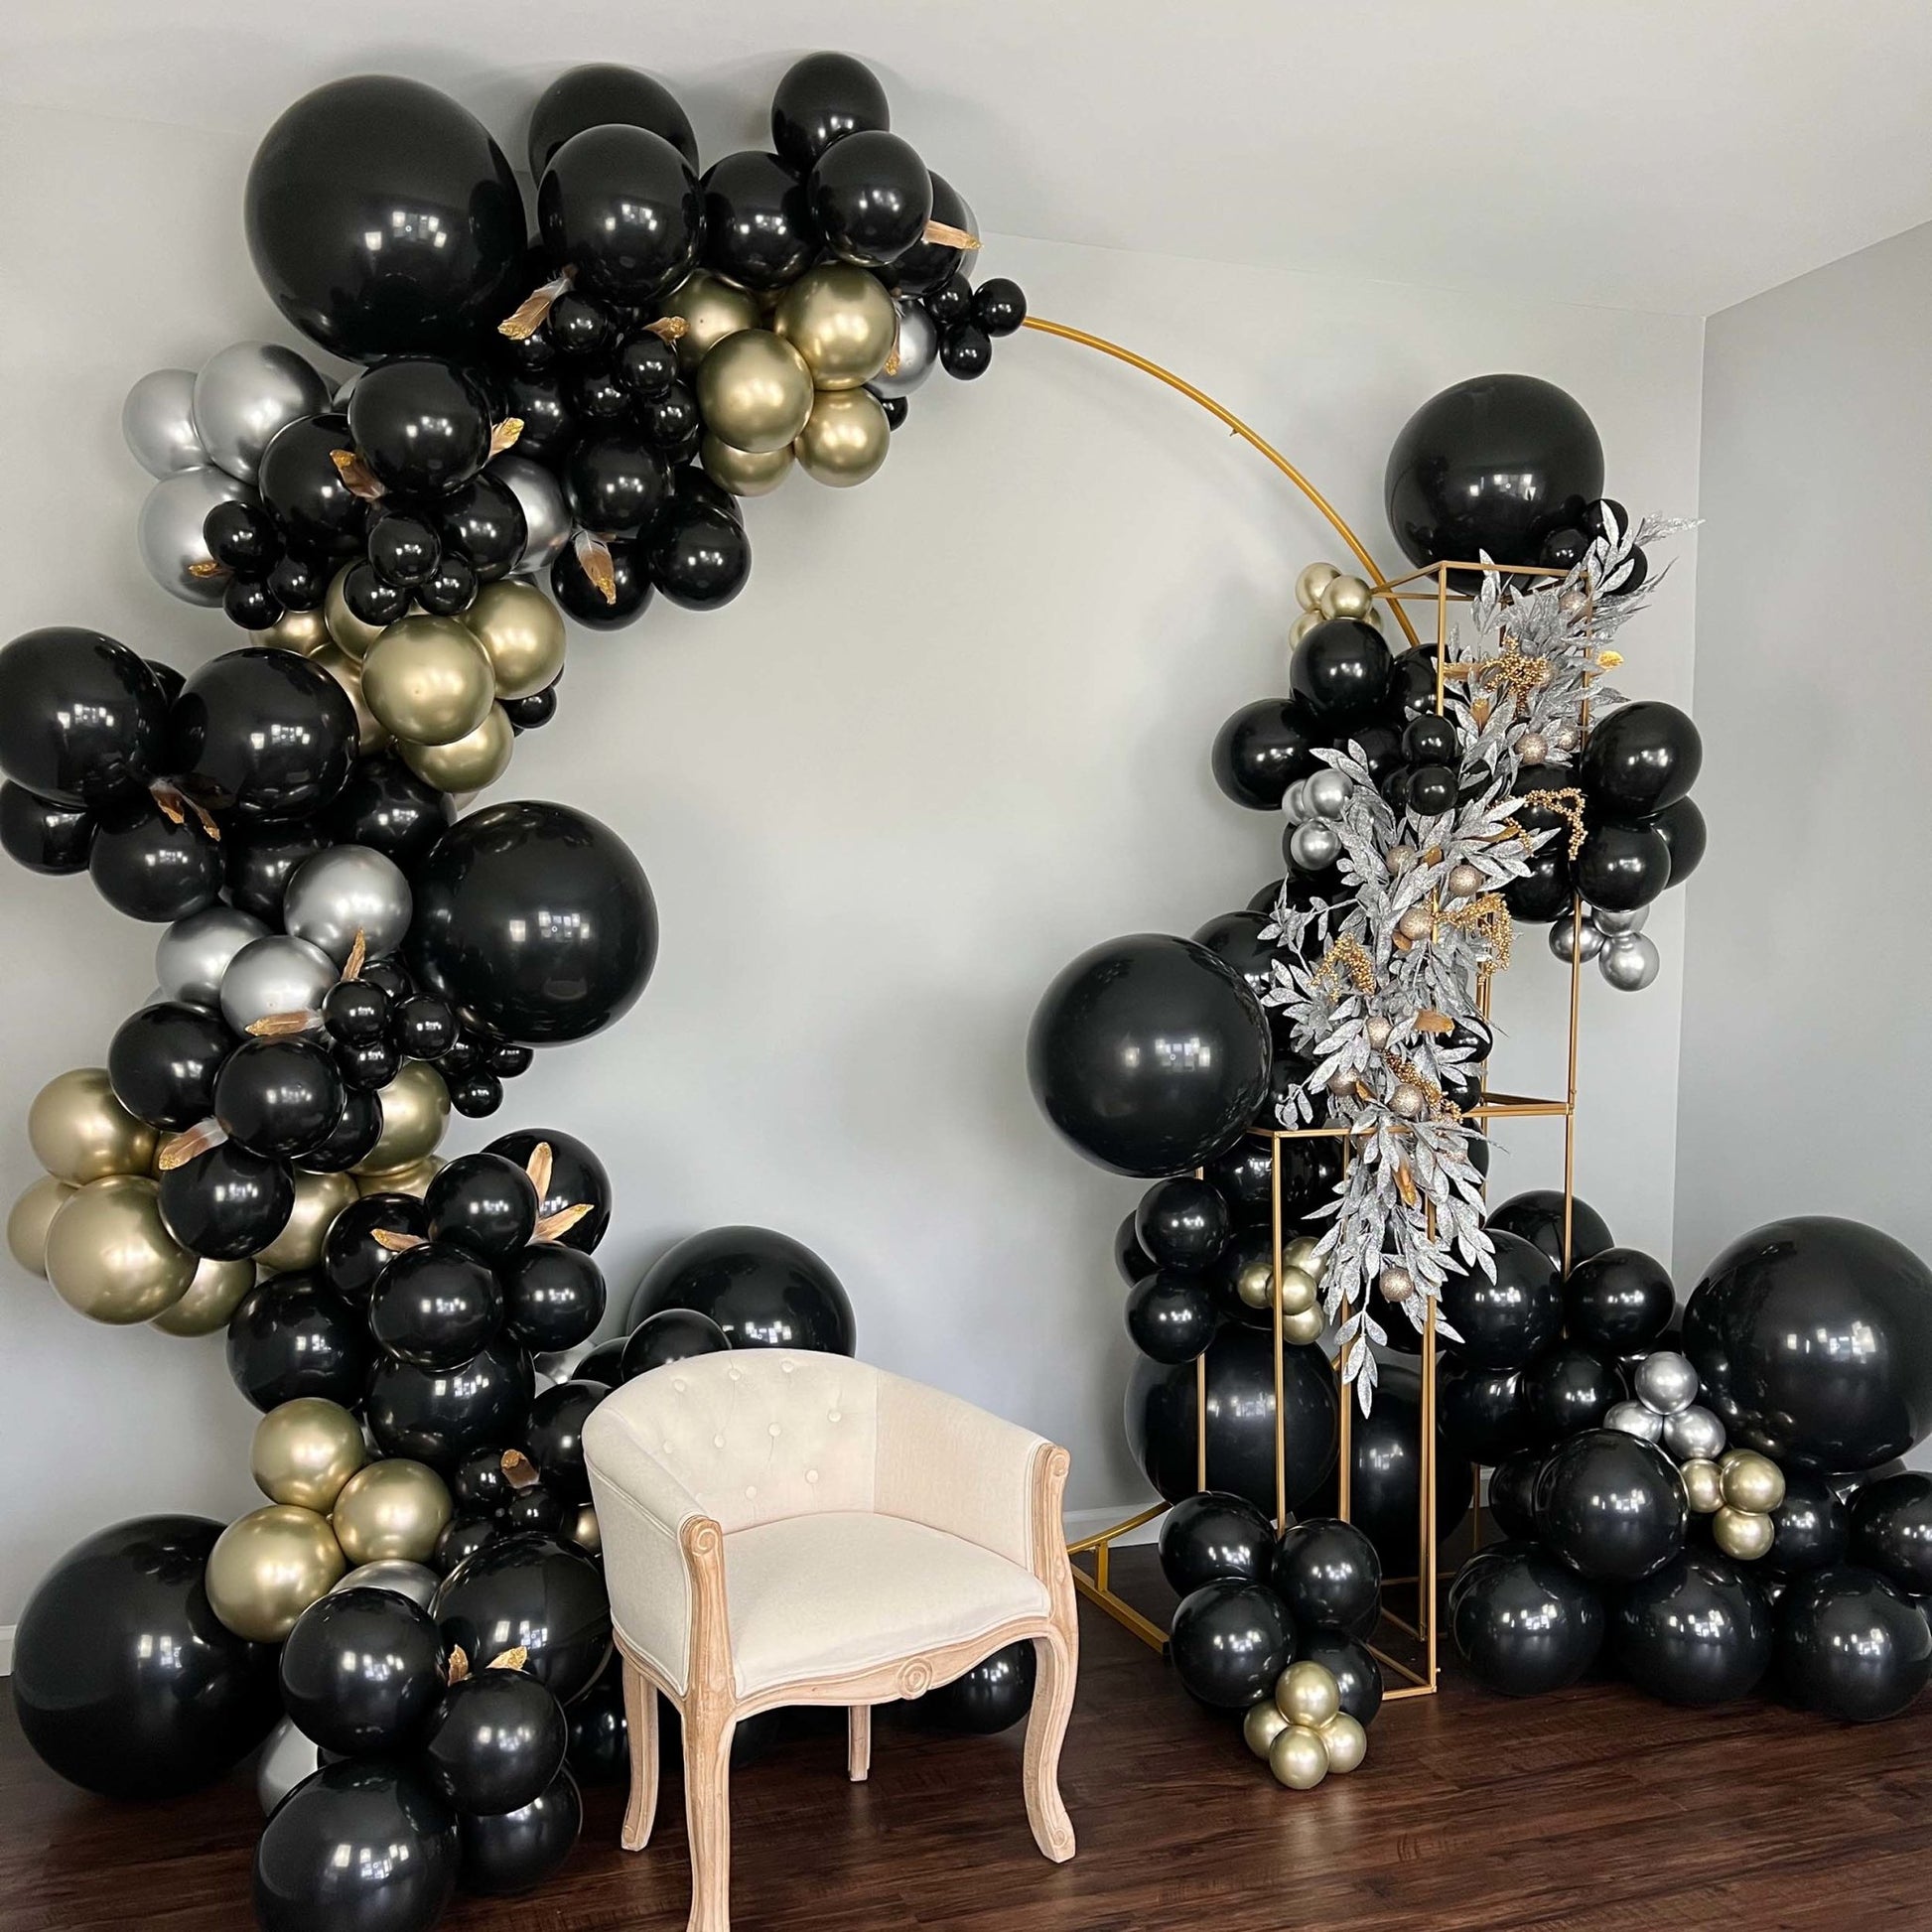 Black, Gold, and Silver Garland Balloon Kit from Ellie's Party Supply